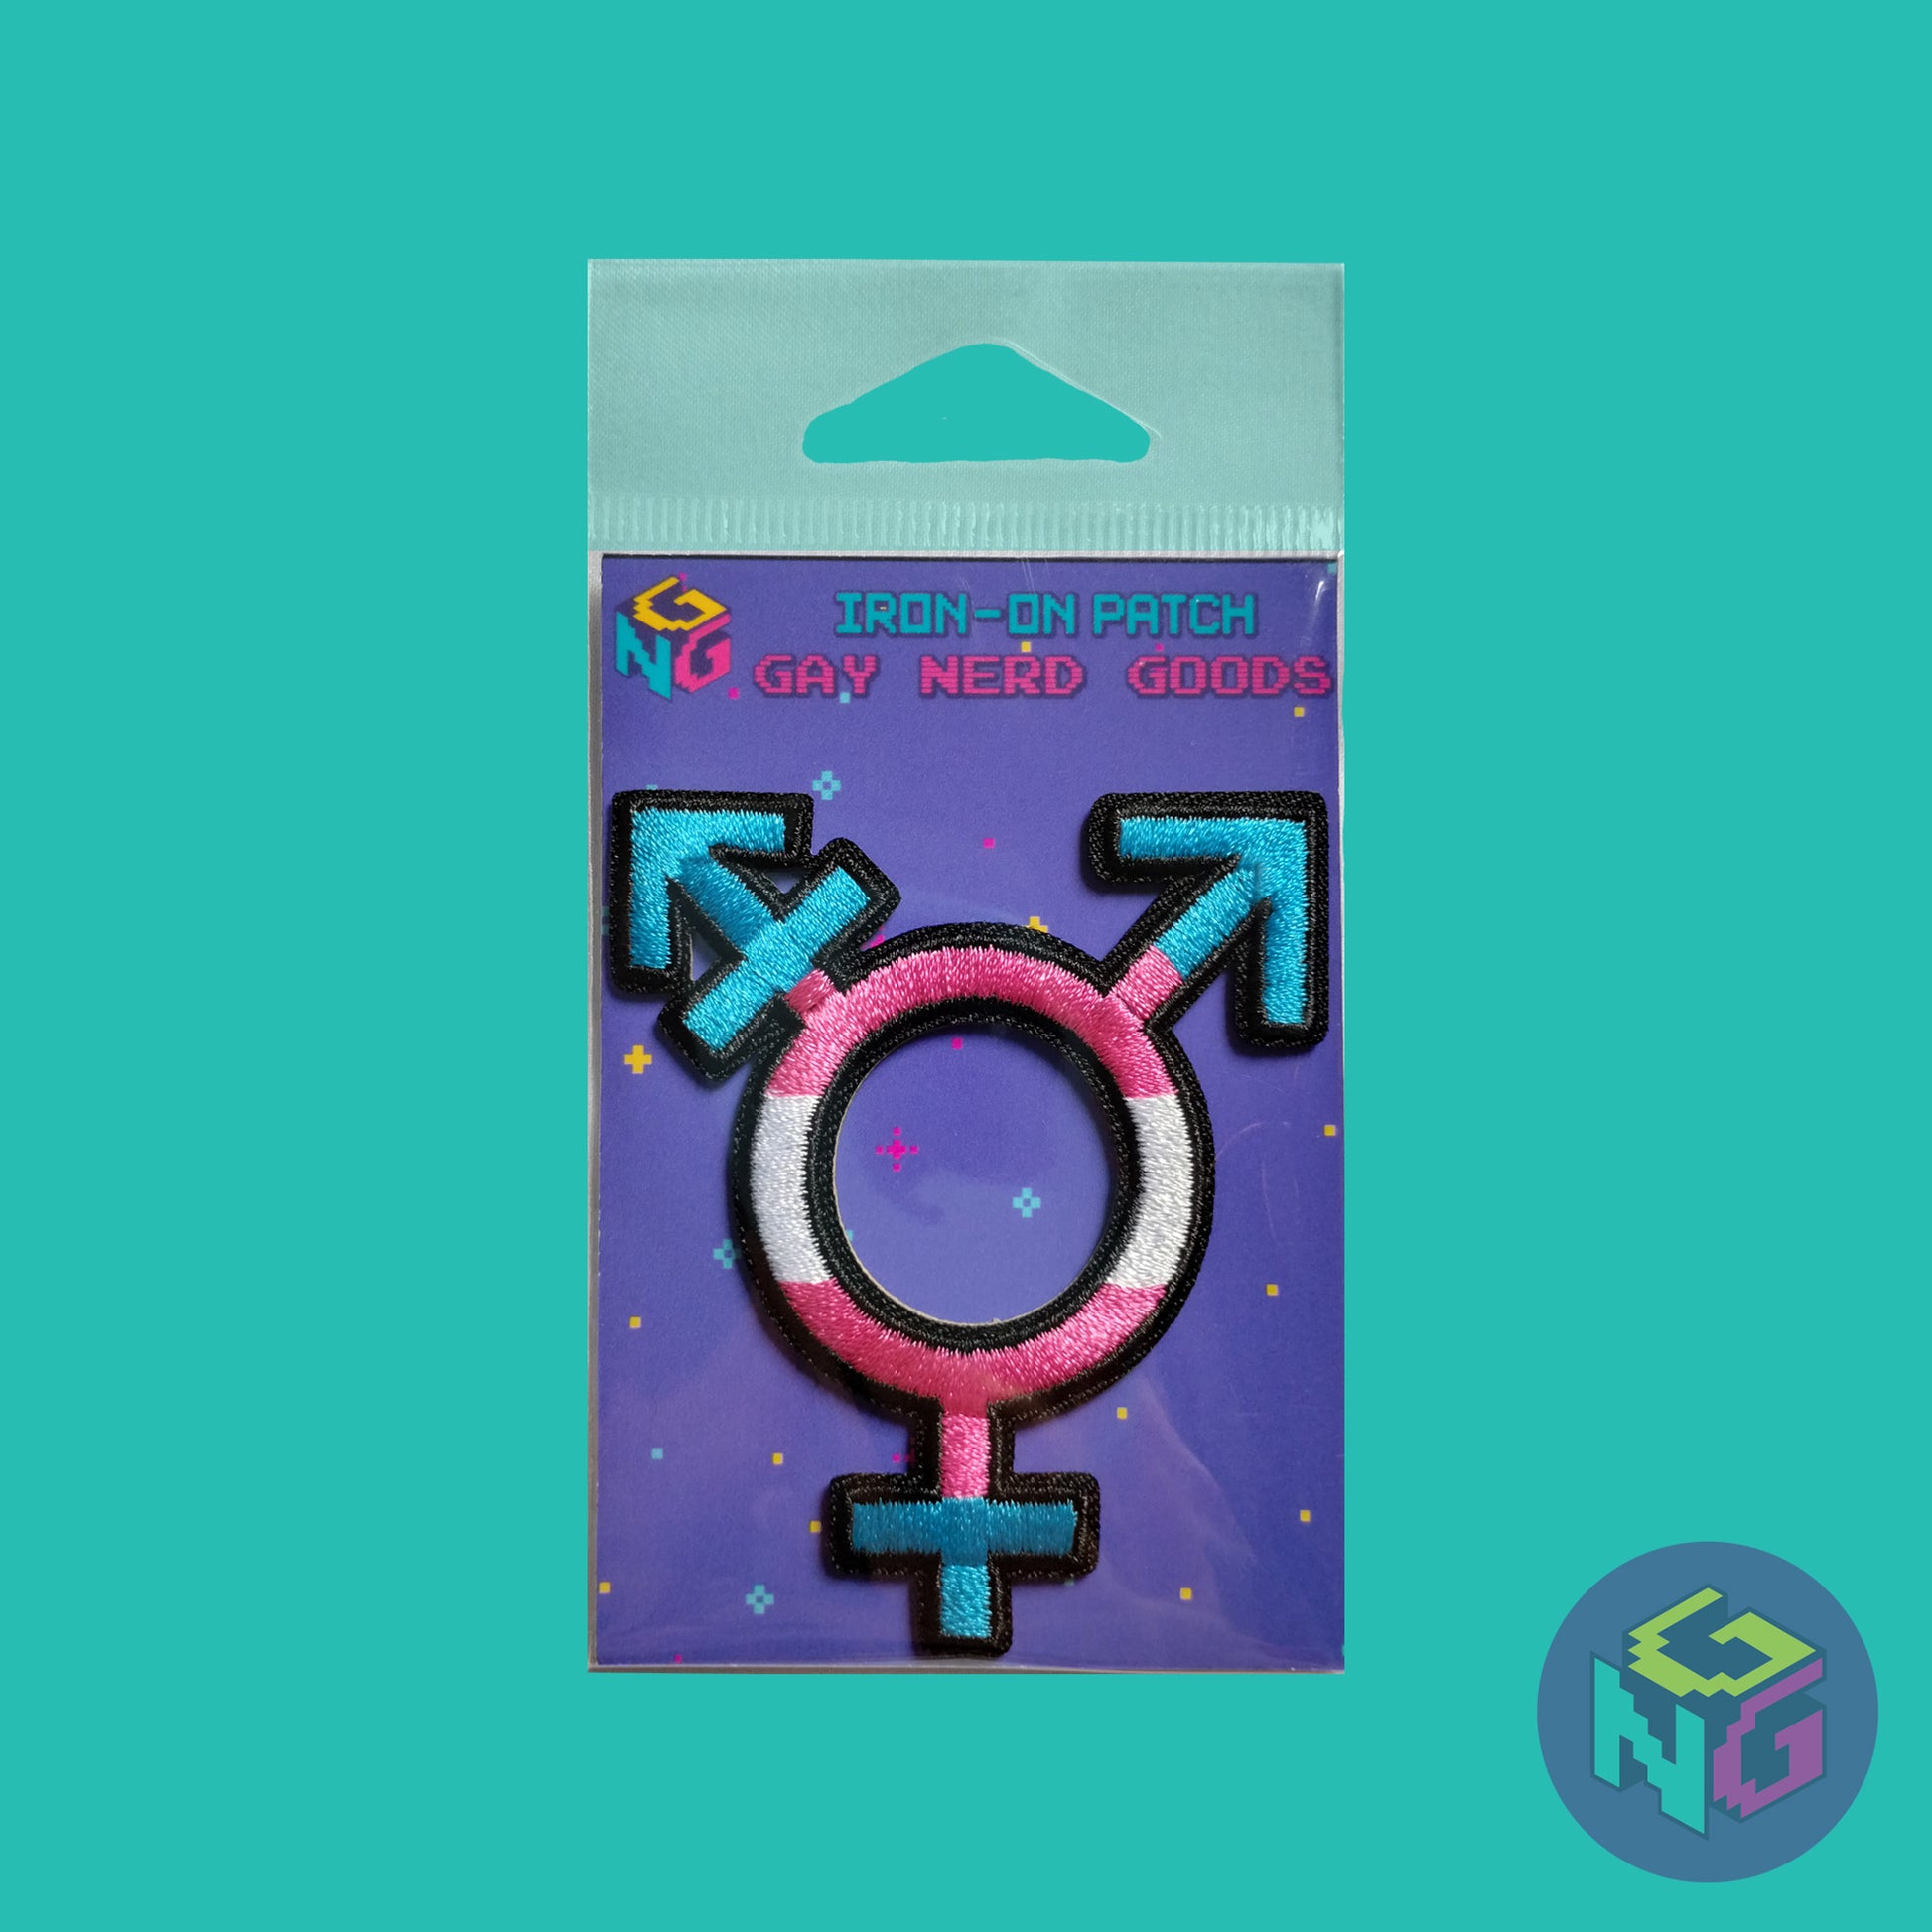 transgender embroidered patch in its packaging against a mint green background